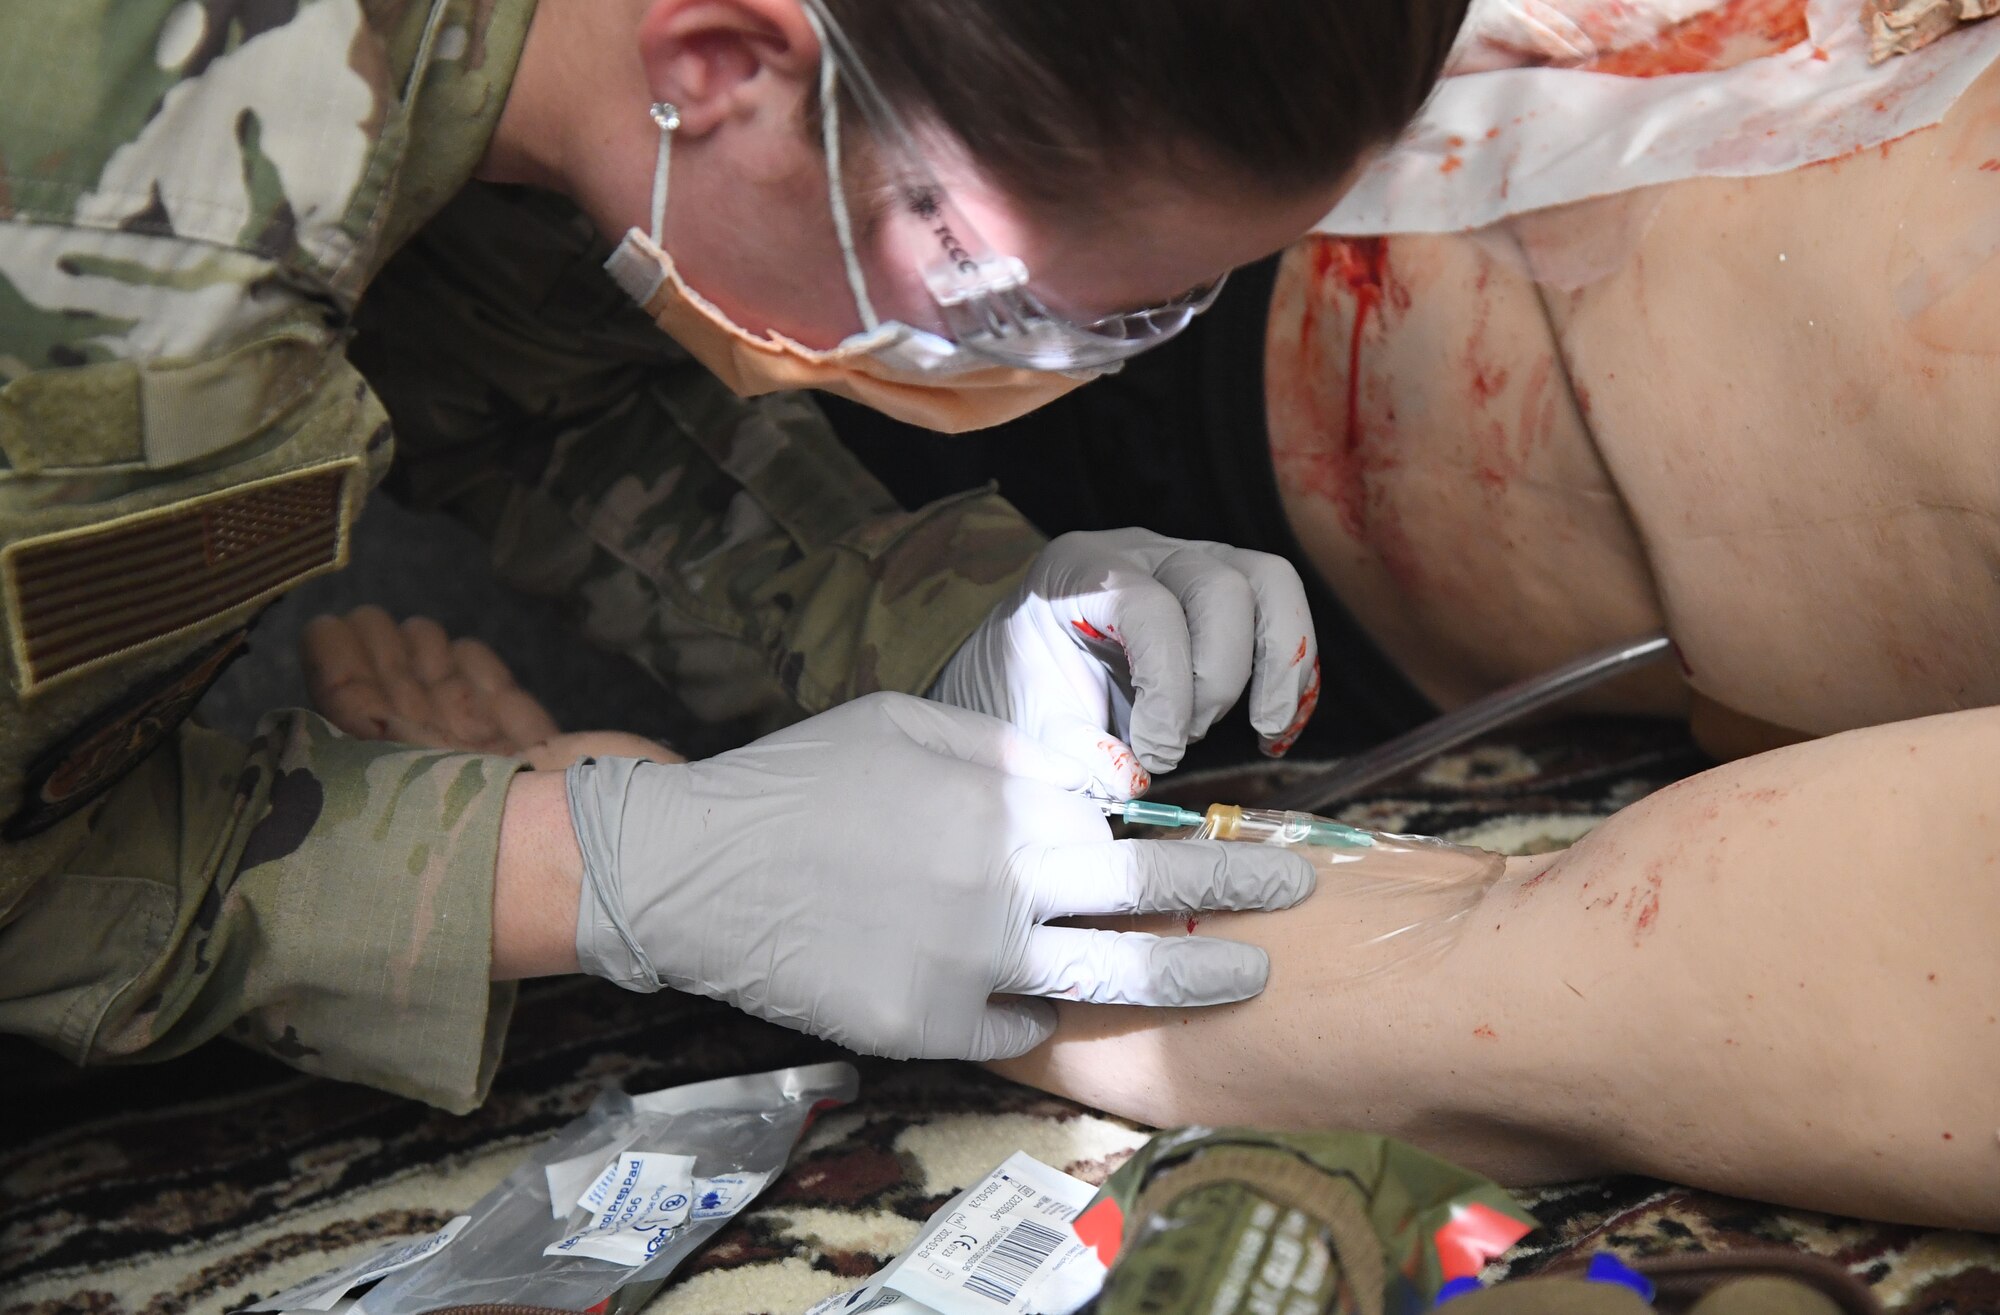 U.S. Air Force Airman 1st Class Andrea Roberts, 81st Medical Support Squadron medical technician, participates in the Tactical Combat Casualty Care training program inside the Locker House at Keesler Air Force Base, Mississippi, March 30, 2021. The training offers hands-on training in a simulated deployed environment using evidence based, life saving techniques and strategies to provide the best trauma care possible on the battlefield. (U.S. Air Force photo by Kemberly Groue)